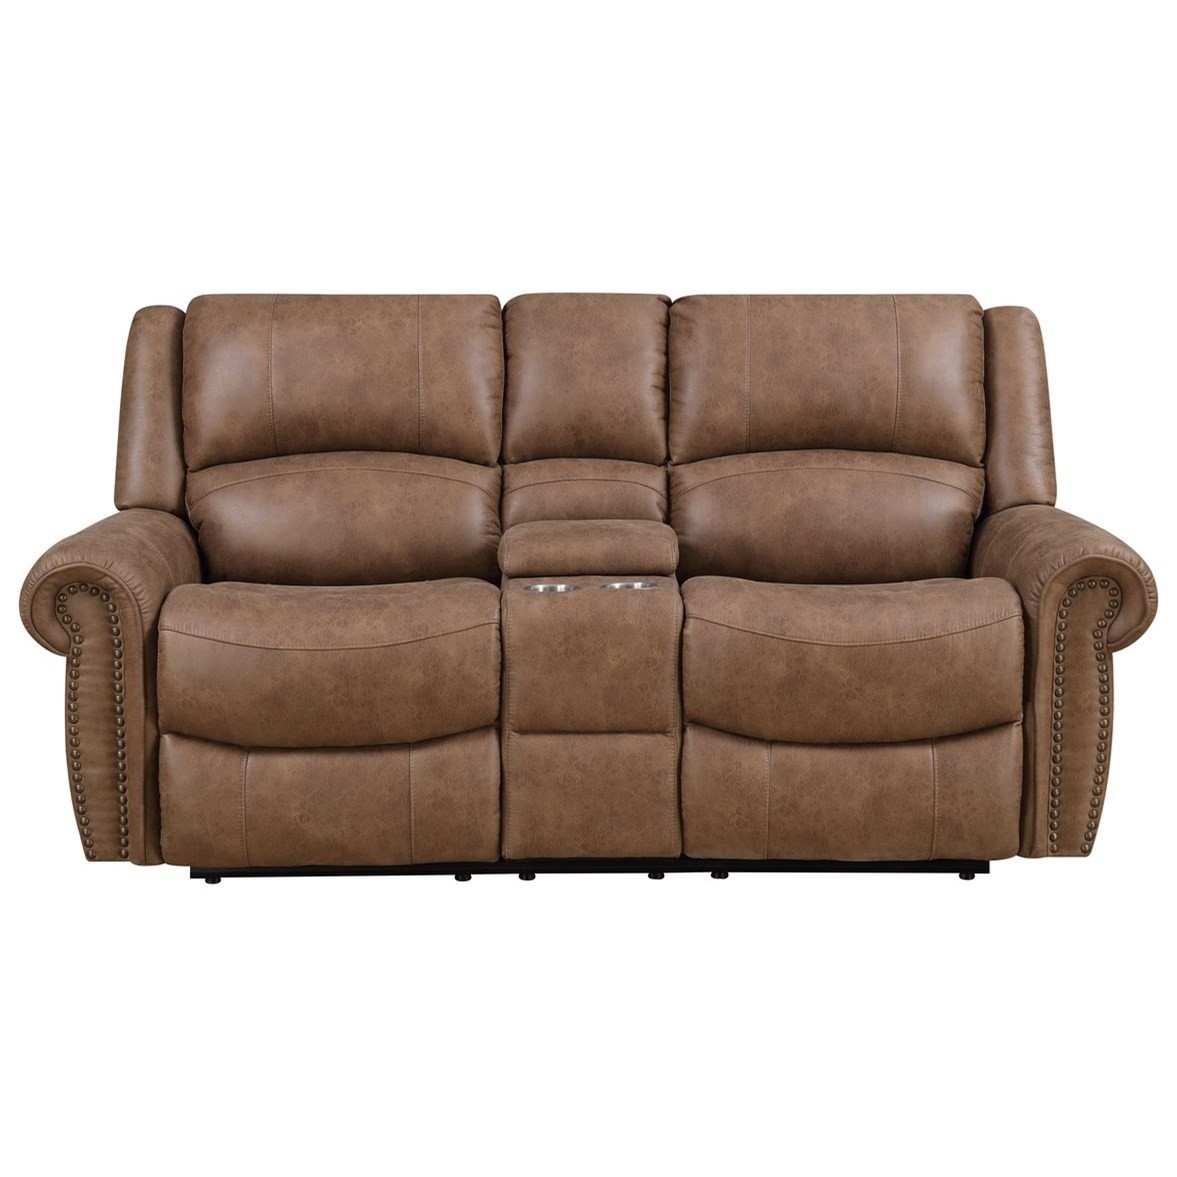 Emerald spencer u7122 traditional reclining loveseat with